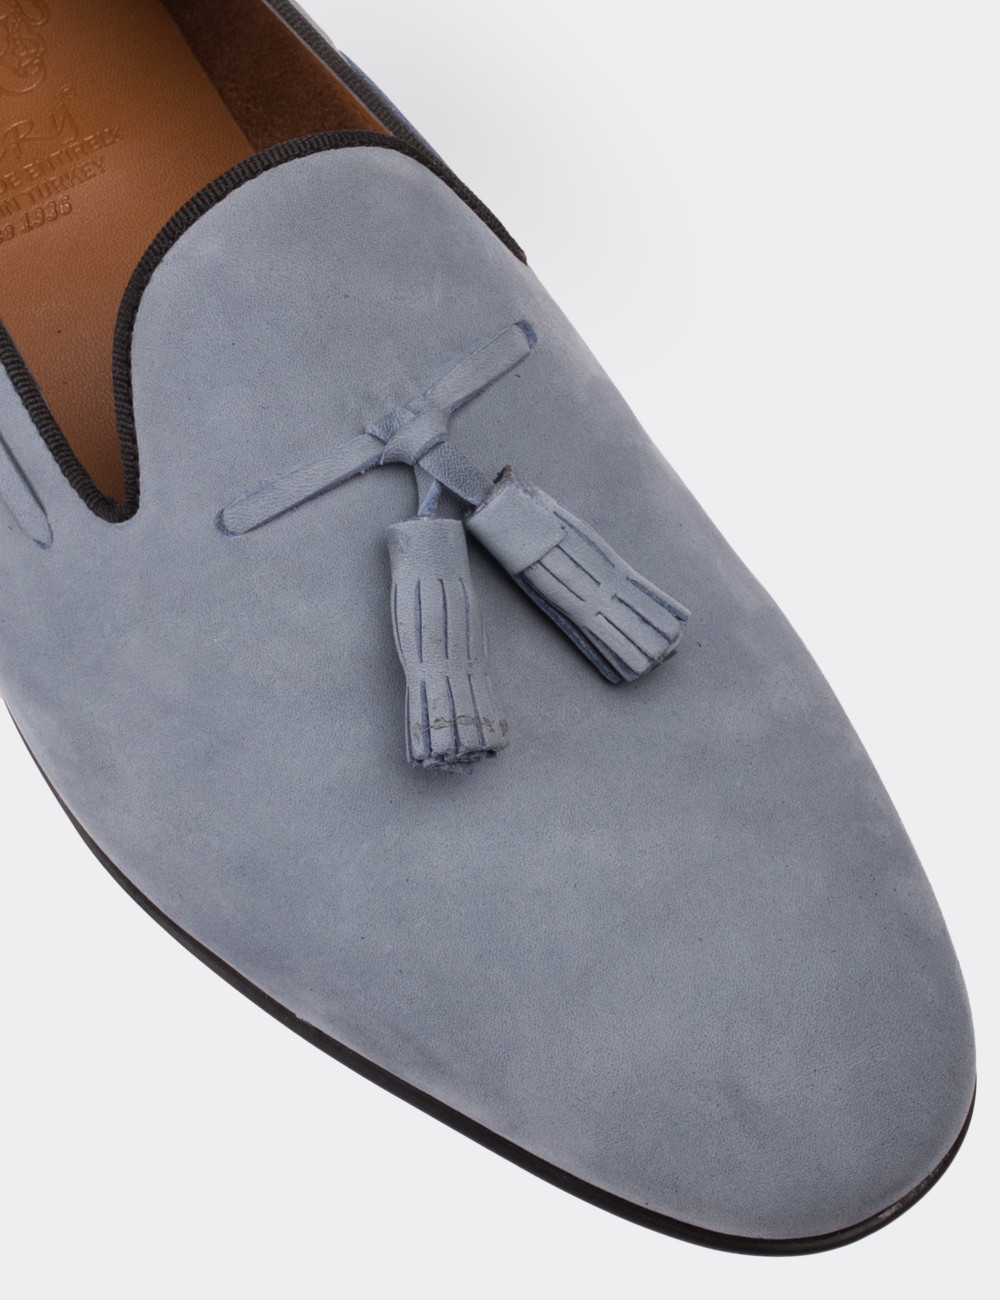 Blue Nubuck Leather Loafers - 01643MMVIC01